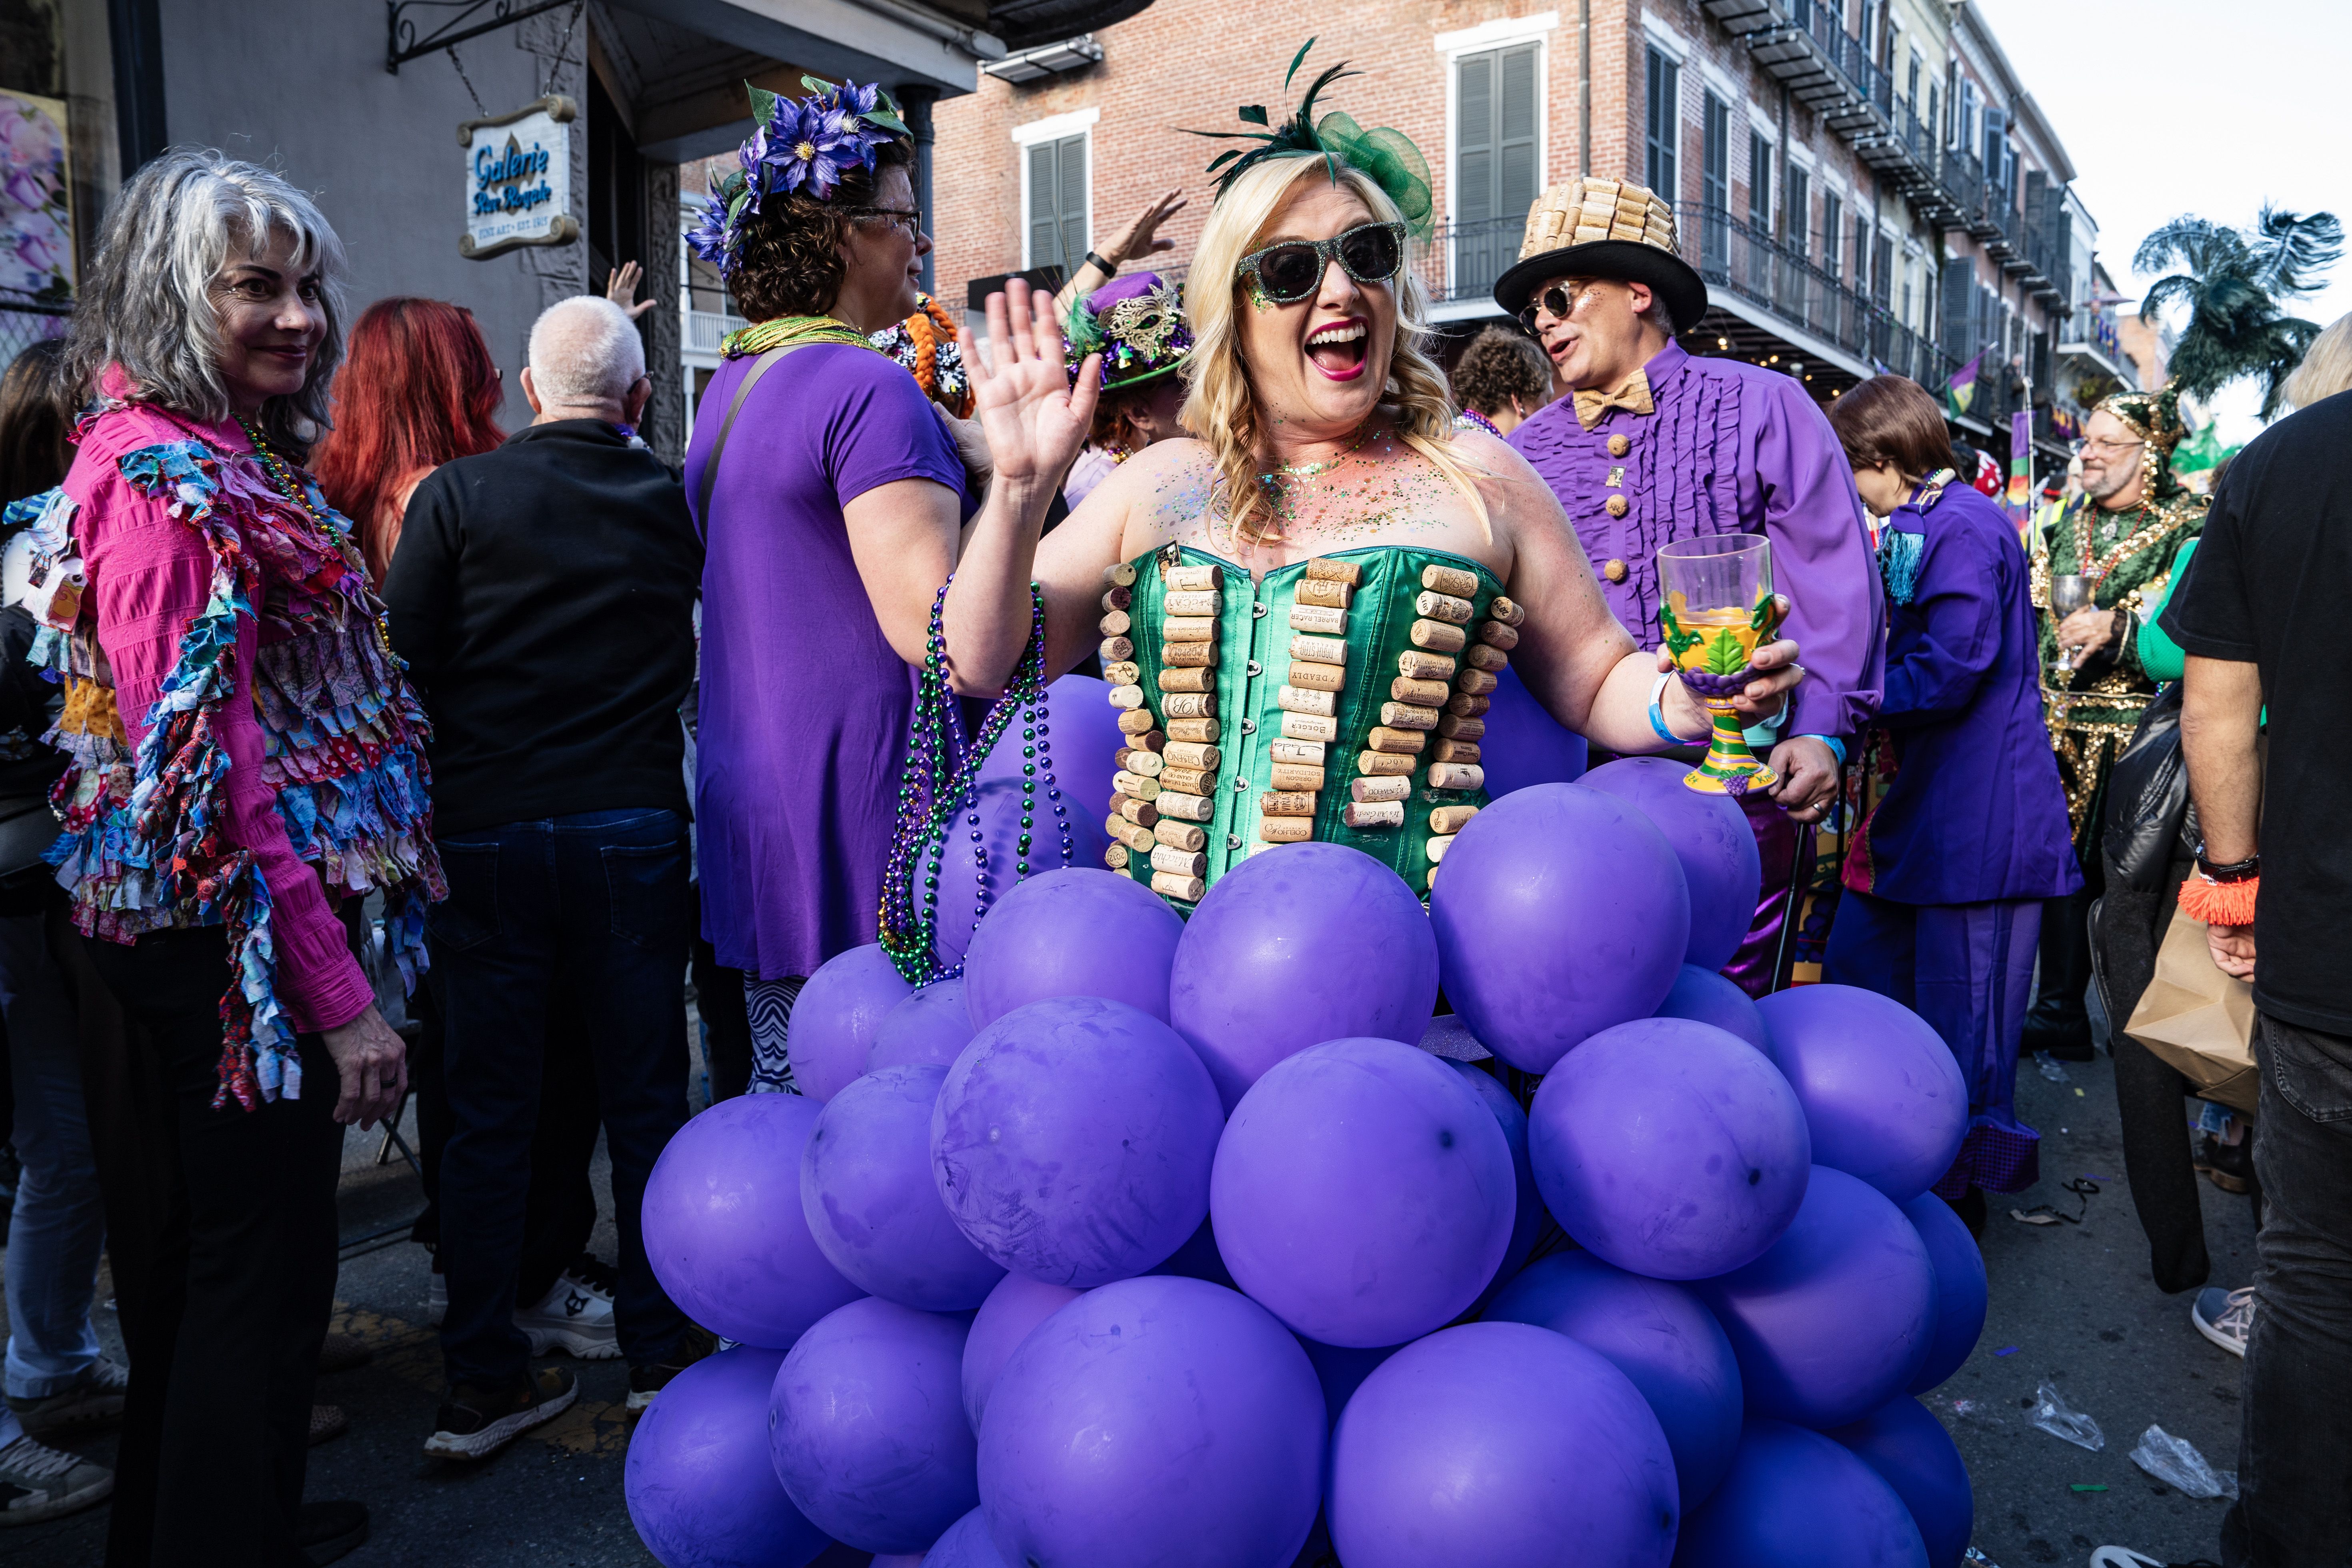 A woman dressed like grapes waves at the camera.